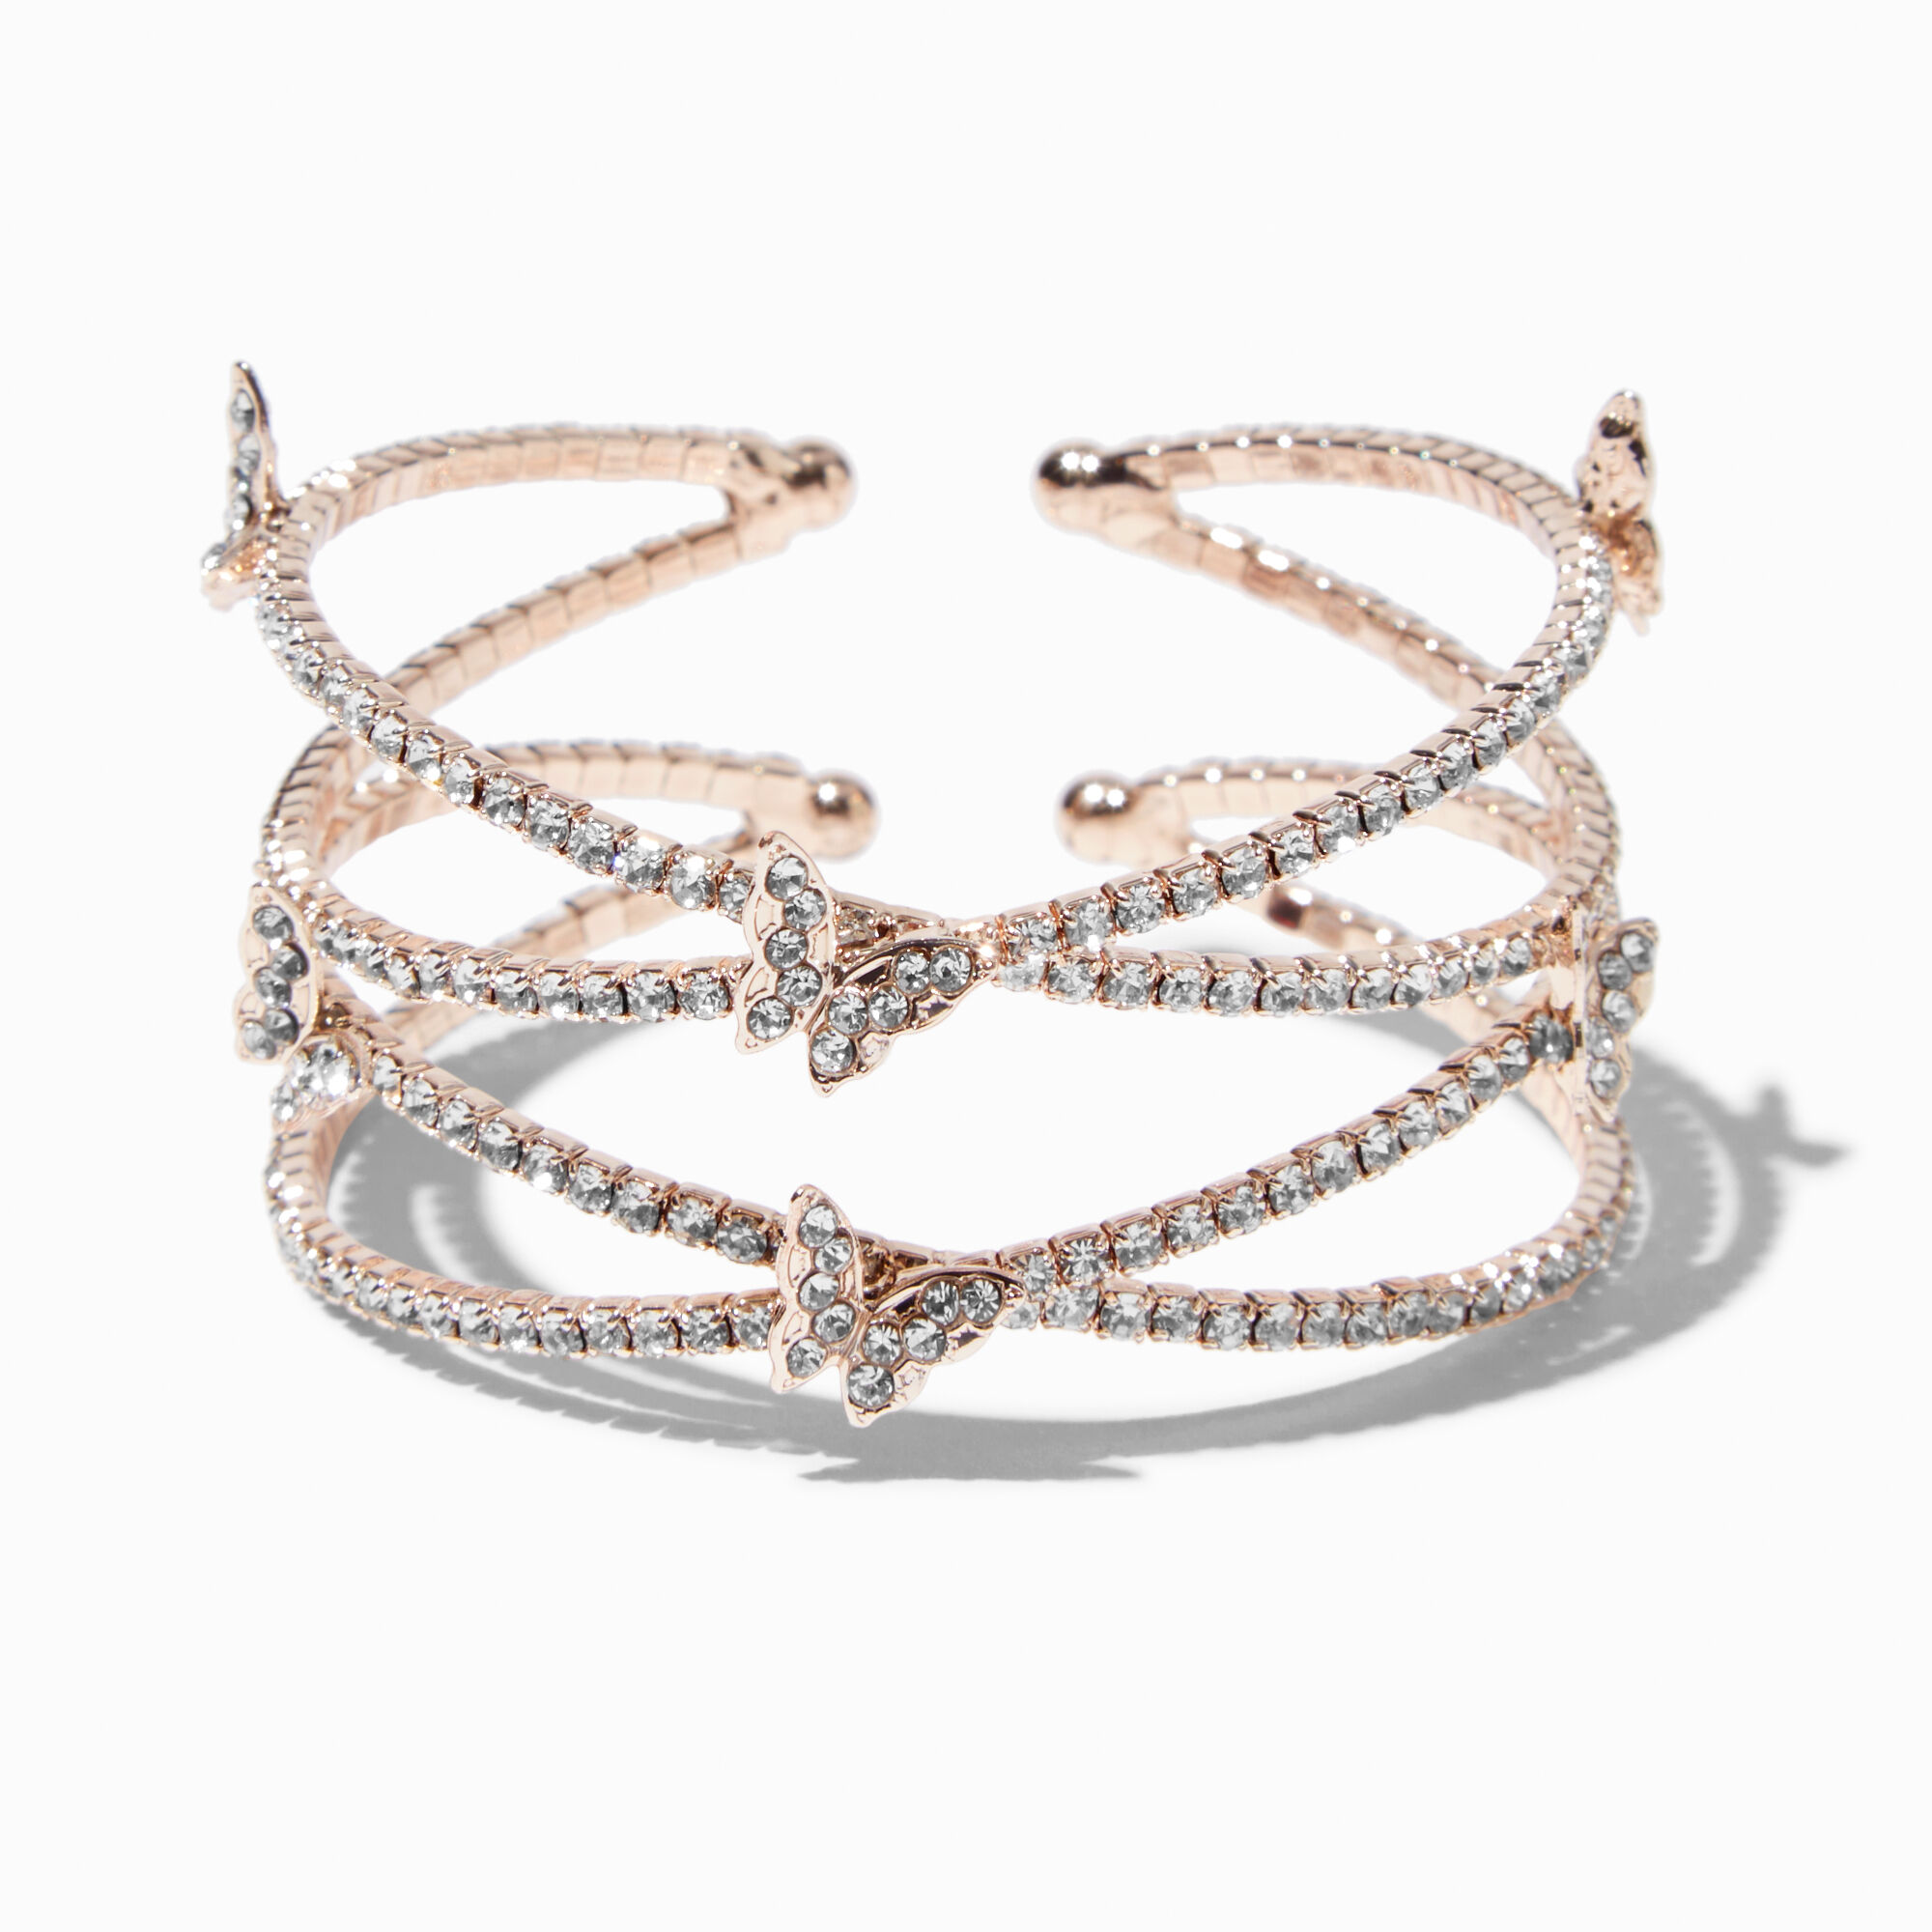 View Claires Rhinestone Butterfly Tone Criss Cross Cuff Bracelet Rose Gold information